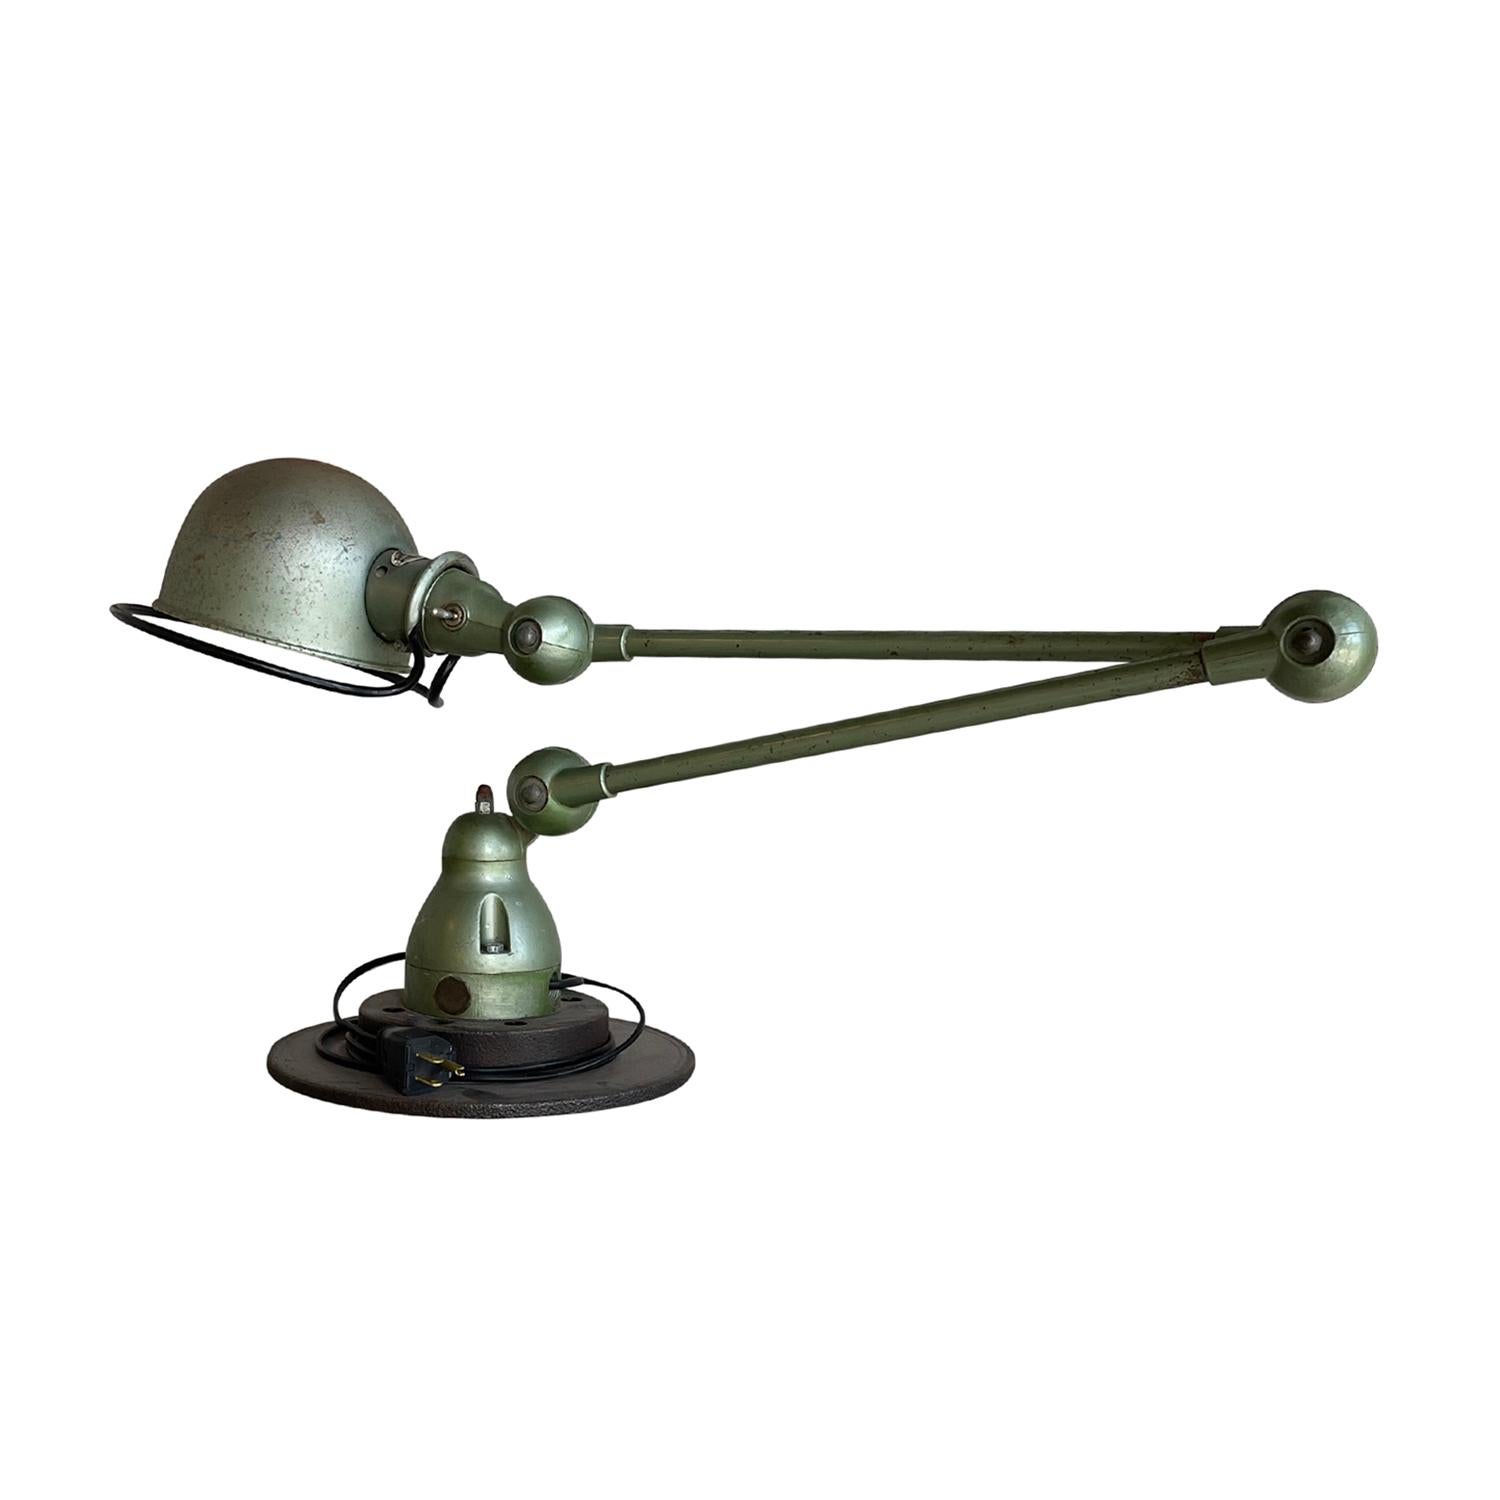 A light-green, vintage Mid-Century Modern French desk light made of hand crafted metal, designed by Jean Louis Domecq and produced by Jielde, in good condition. The Industrial car brake, table lamp is composed with two adjustable arms, featuring a